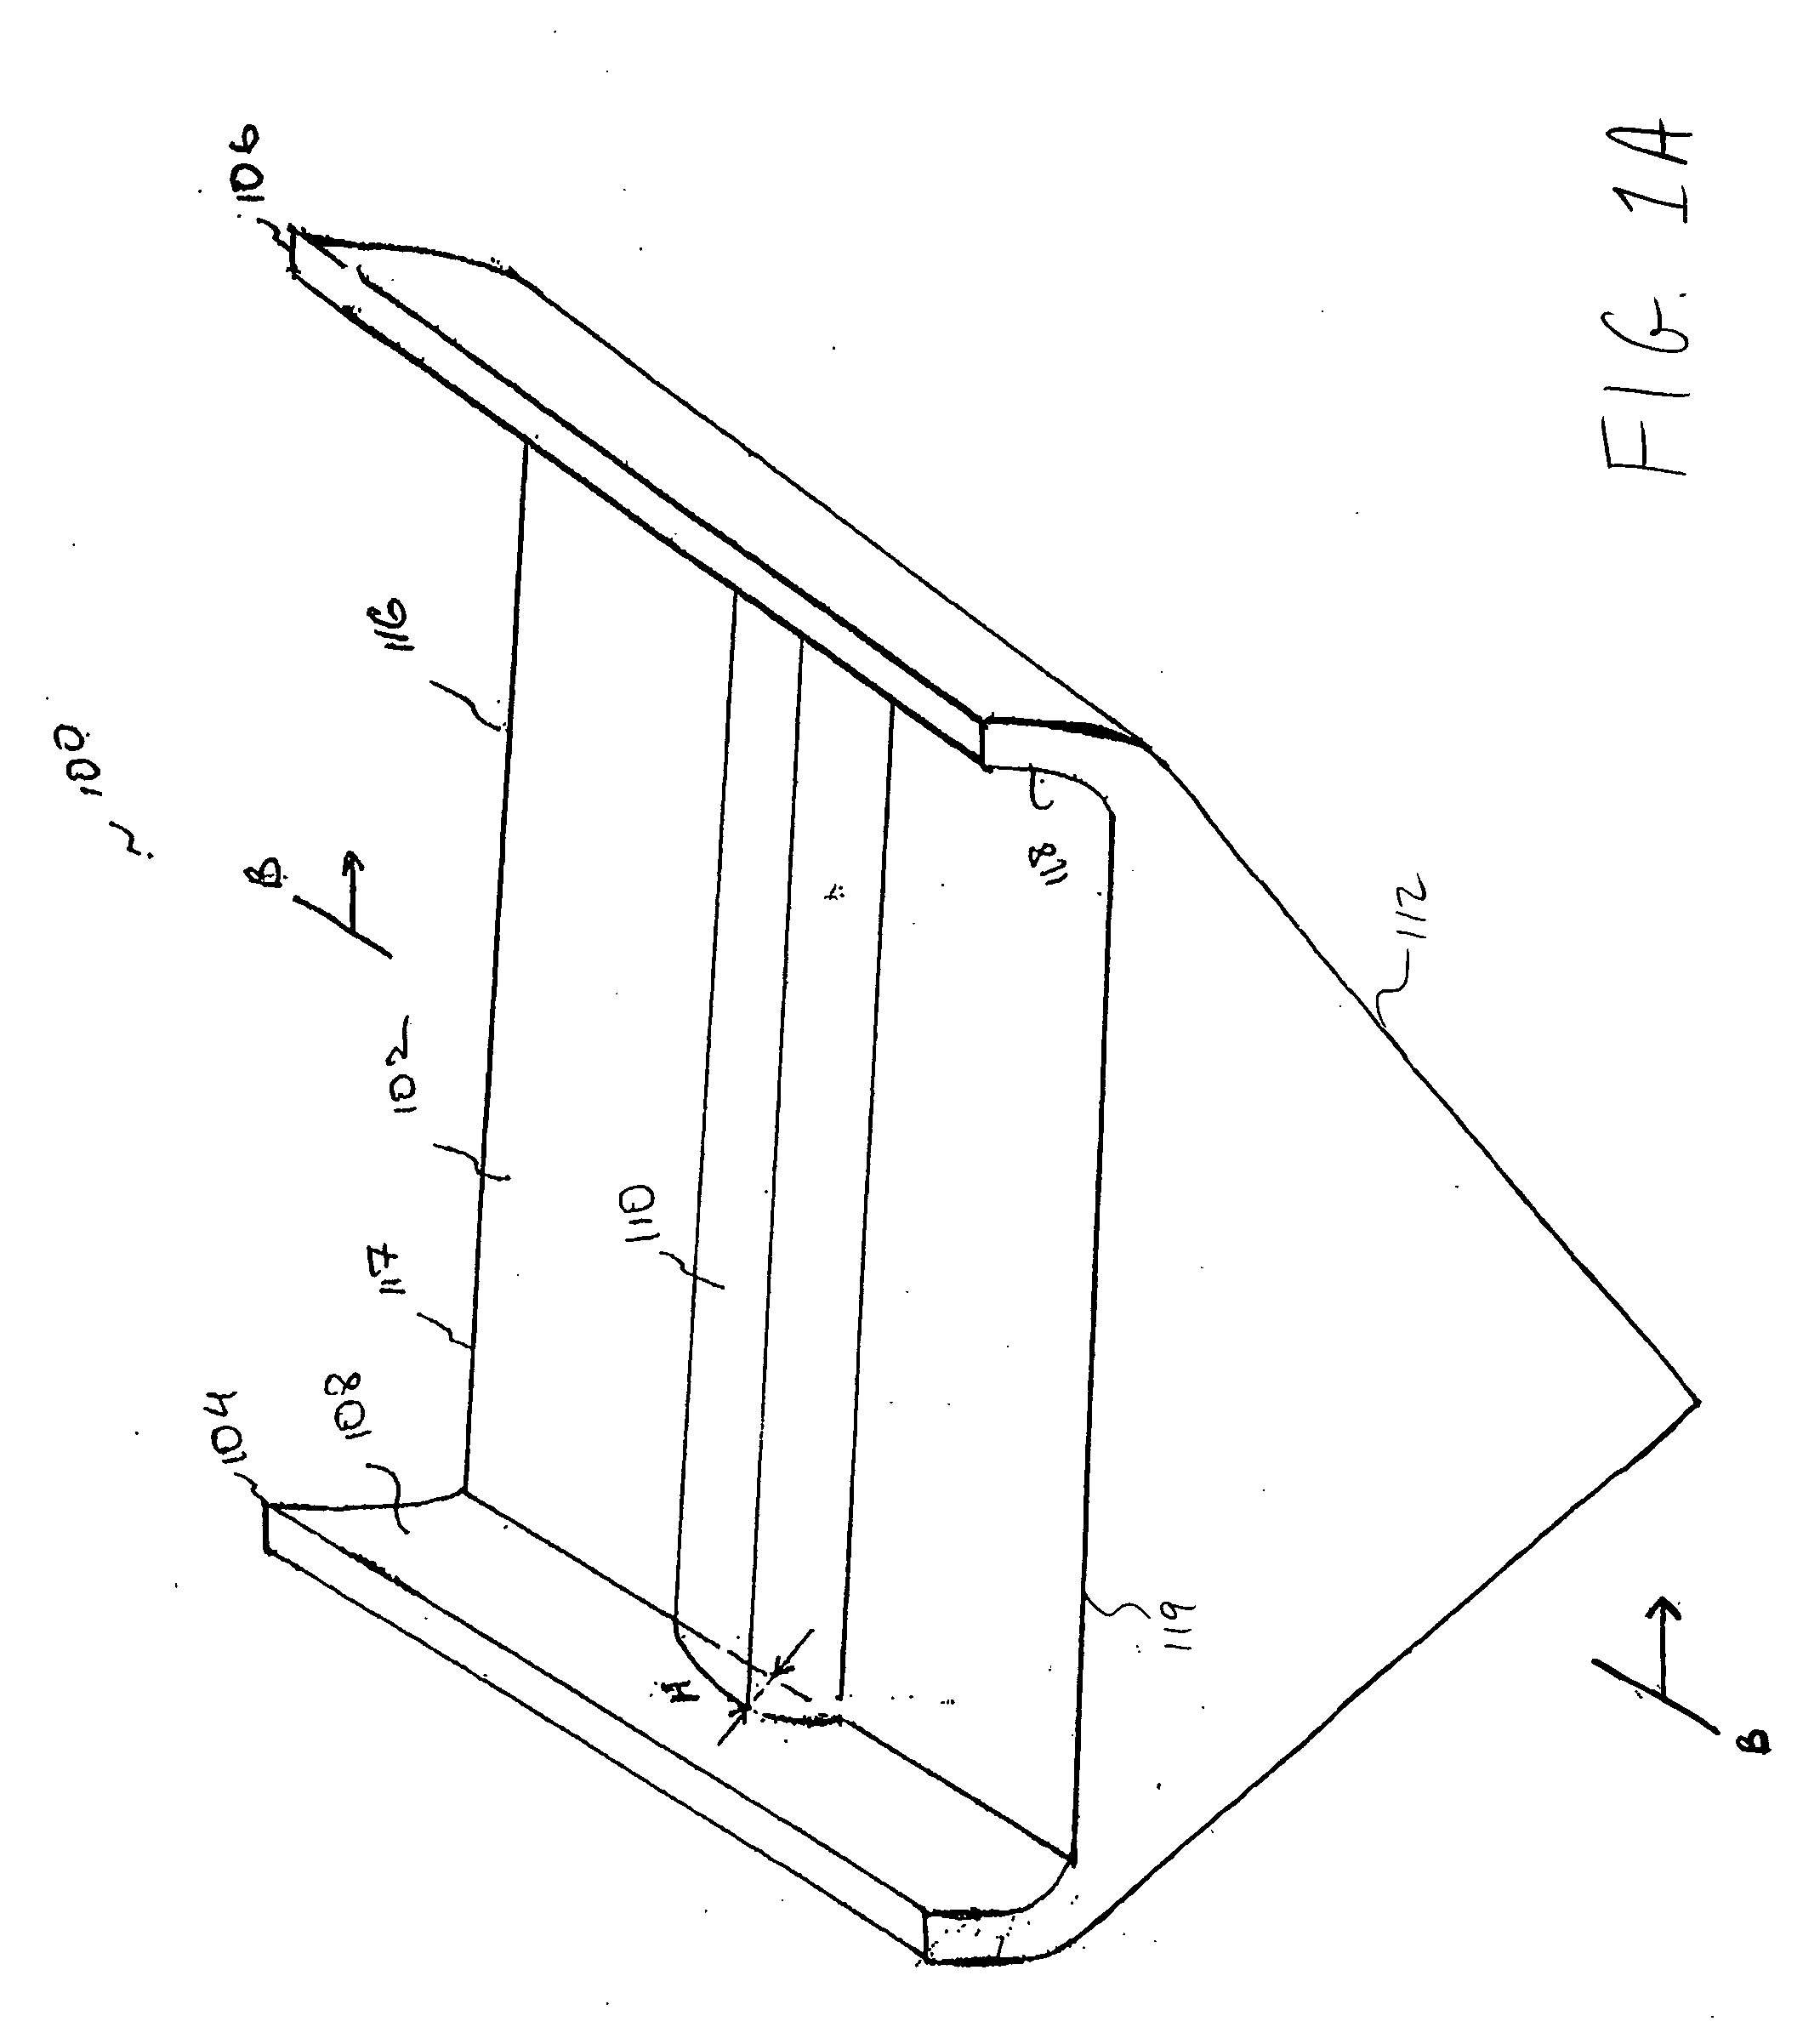 Palm print scanner and methods